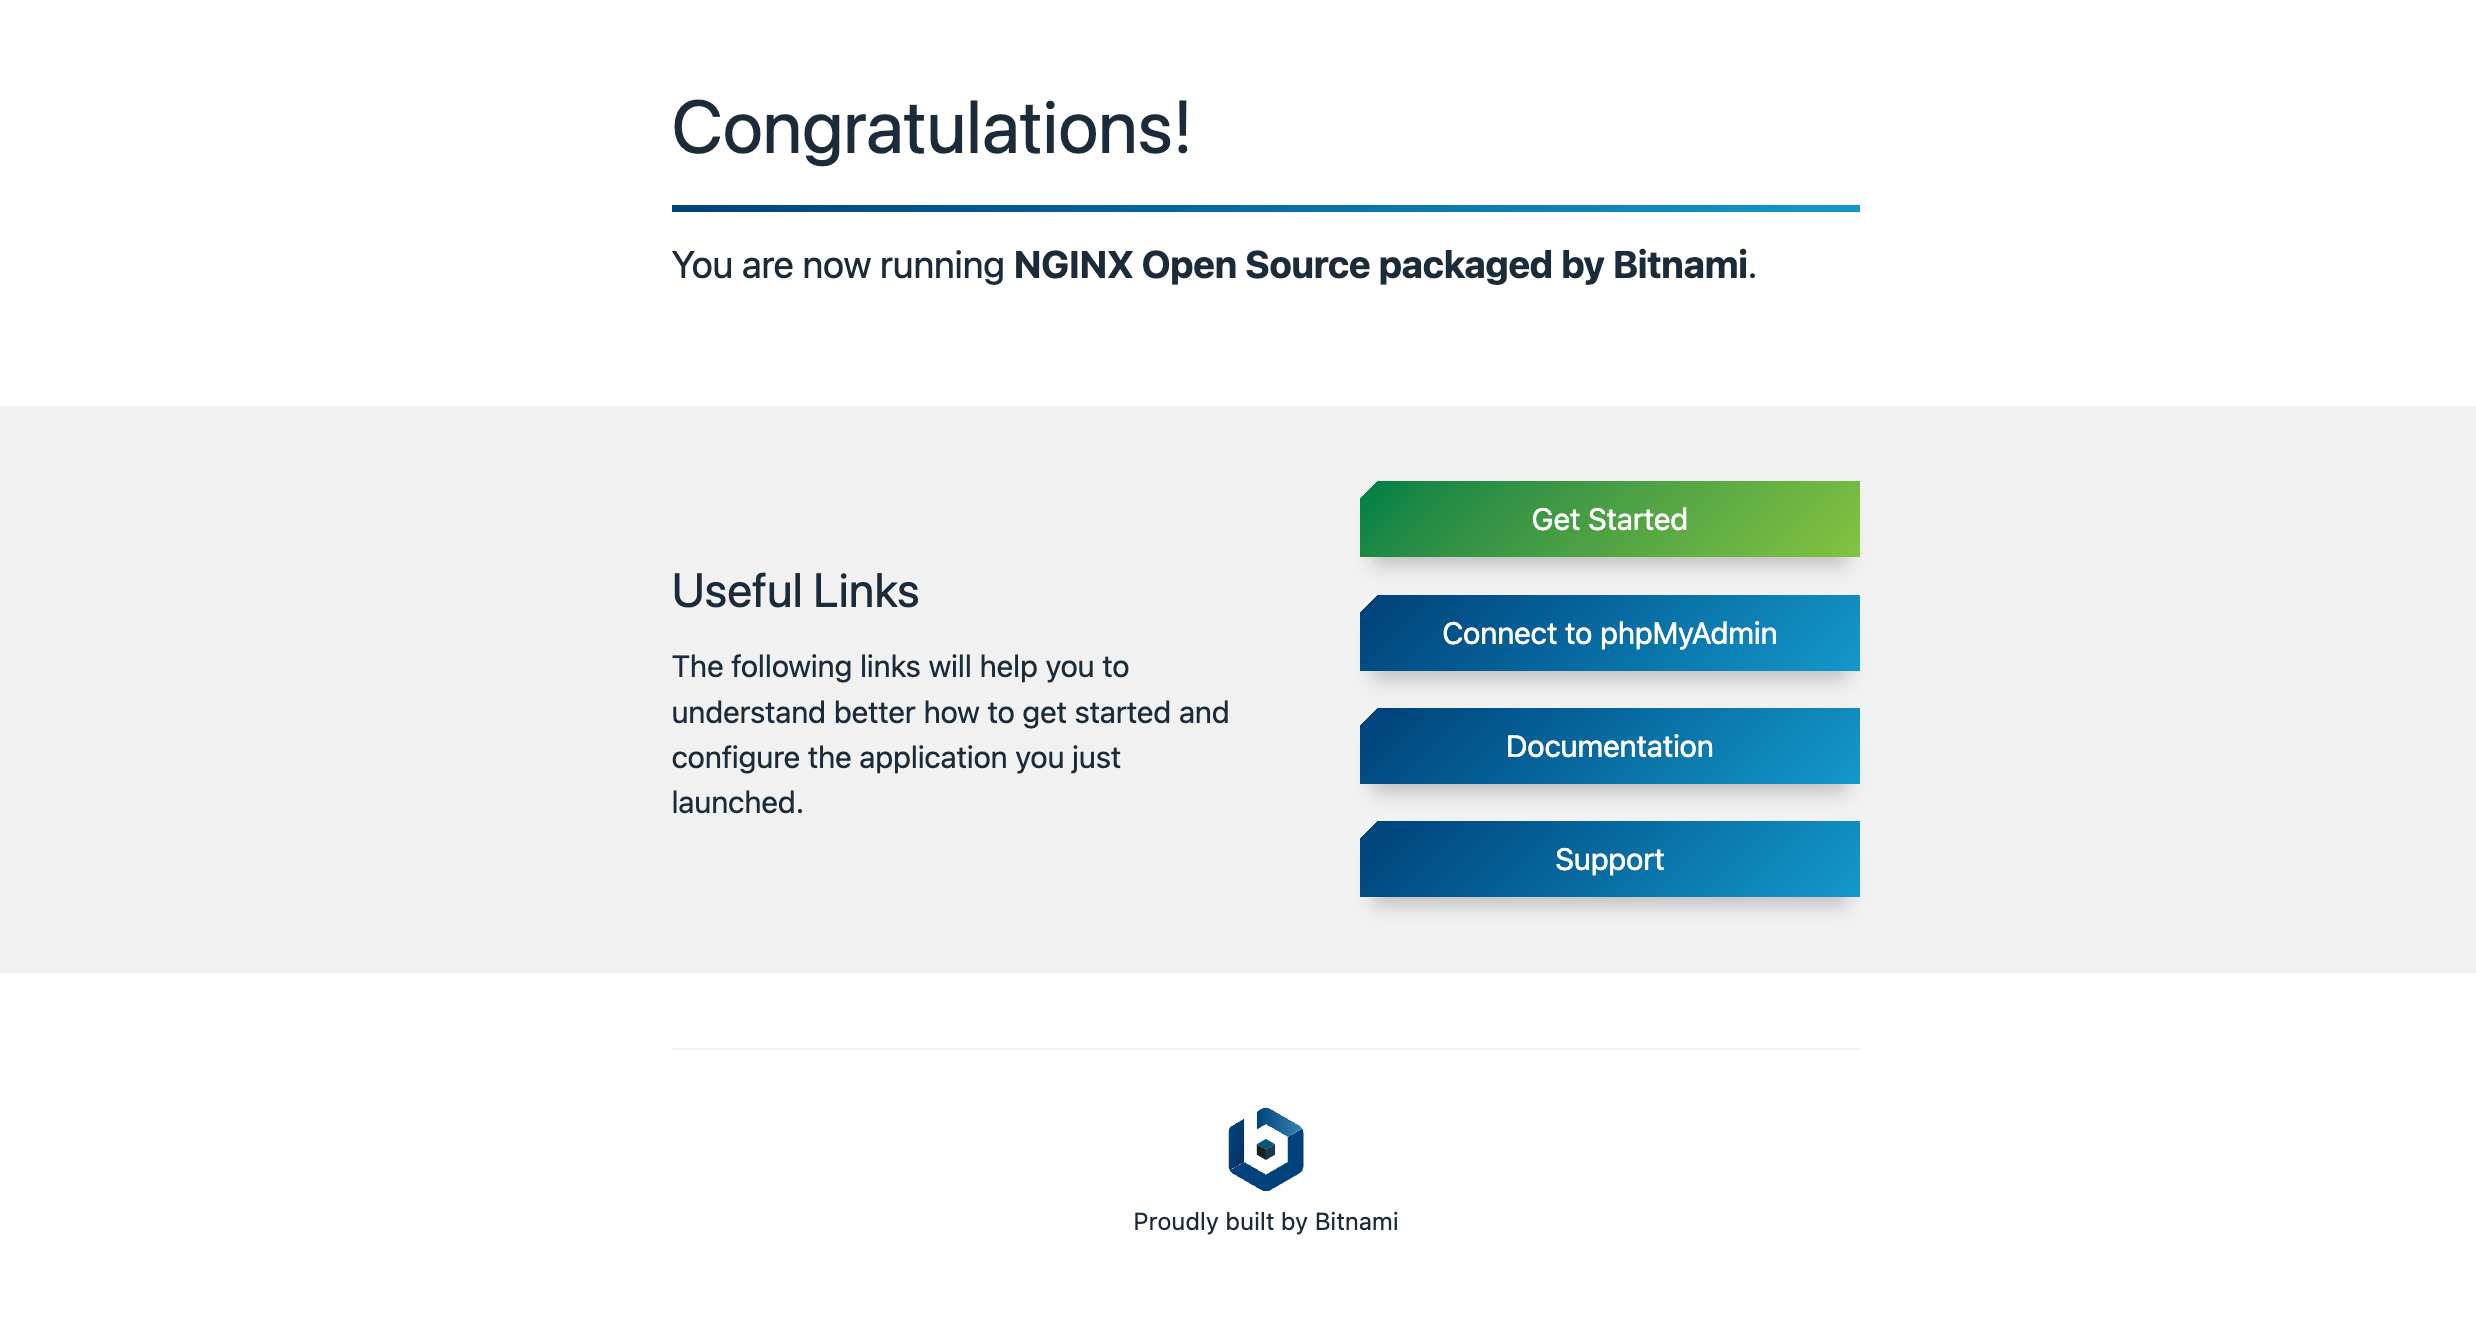 「Congratulations!」のポップアップ。「You are now running Bitnami Nginx 1.10.0-2 in the Cloud」という通知が表示されます。